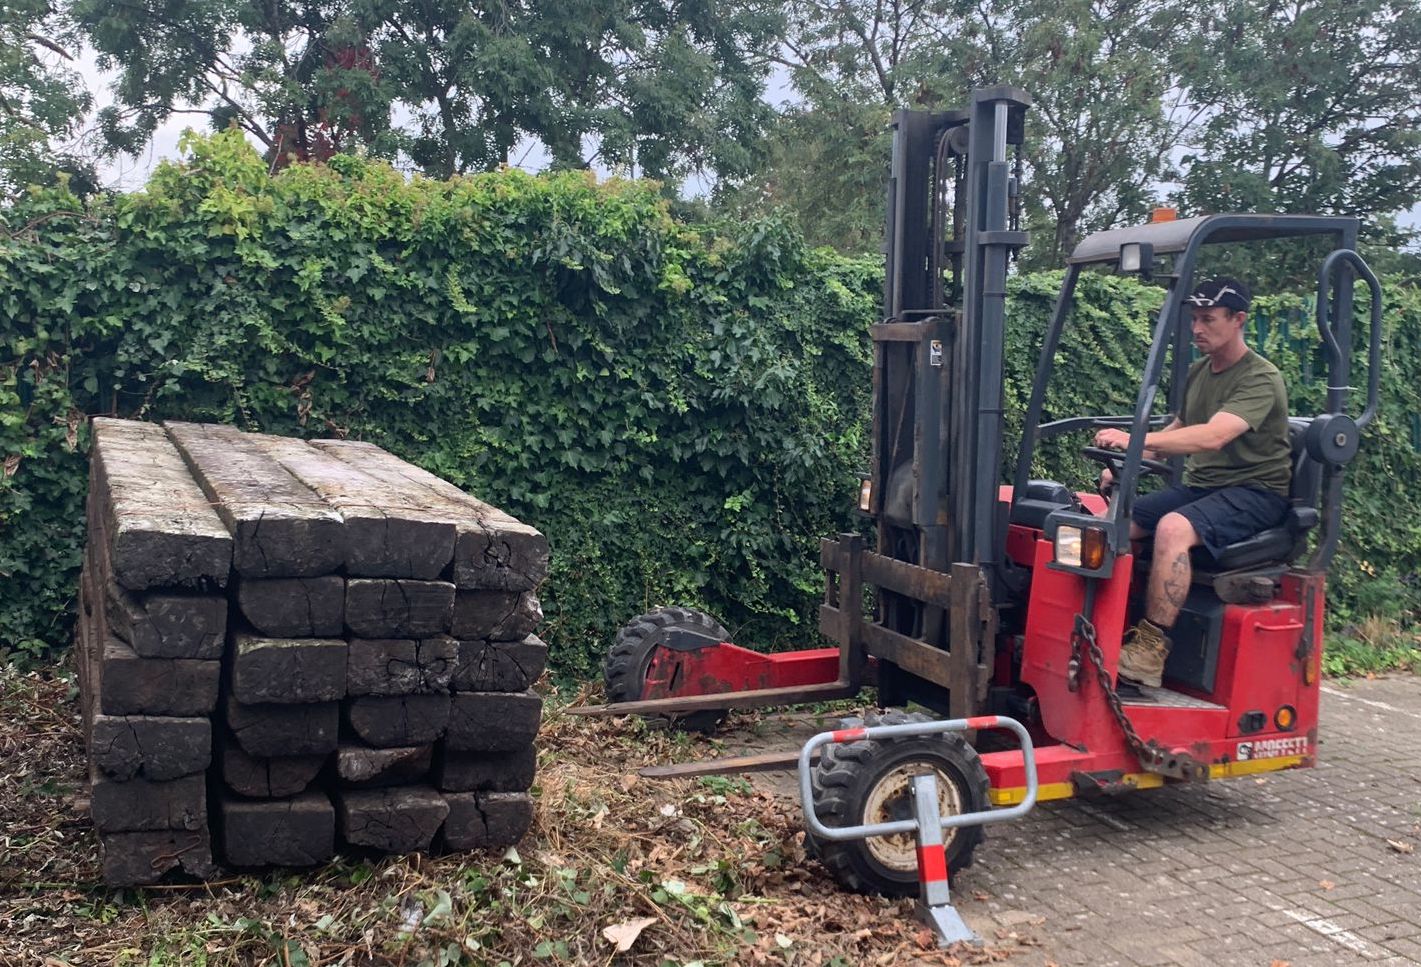 Premium Lorry offload of railway sleepers with a forklift. Railwaysleepers.com